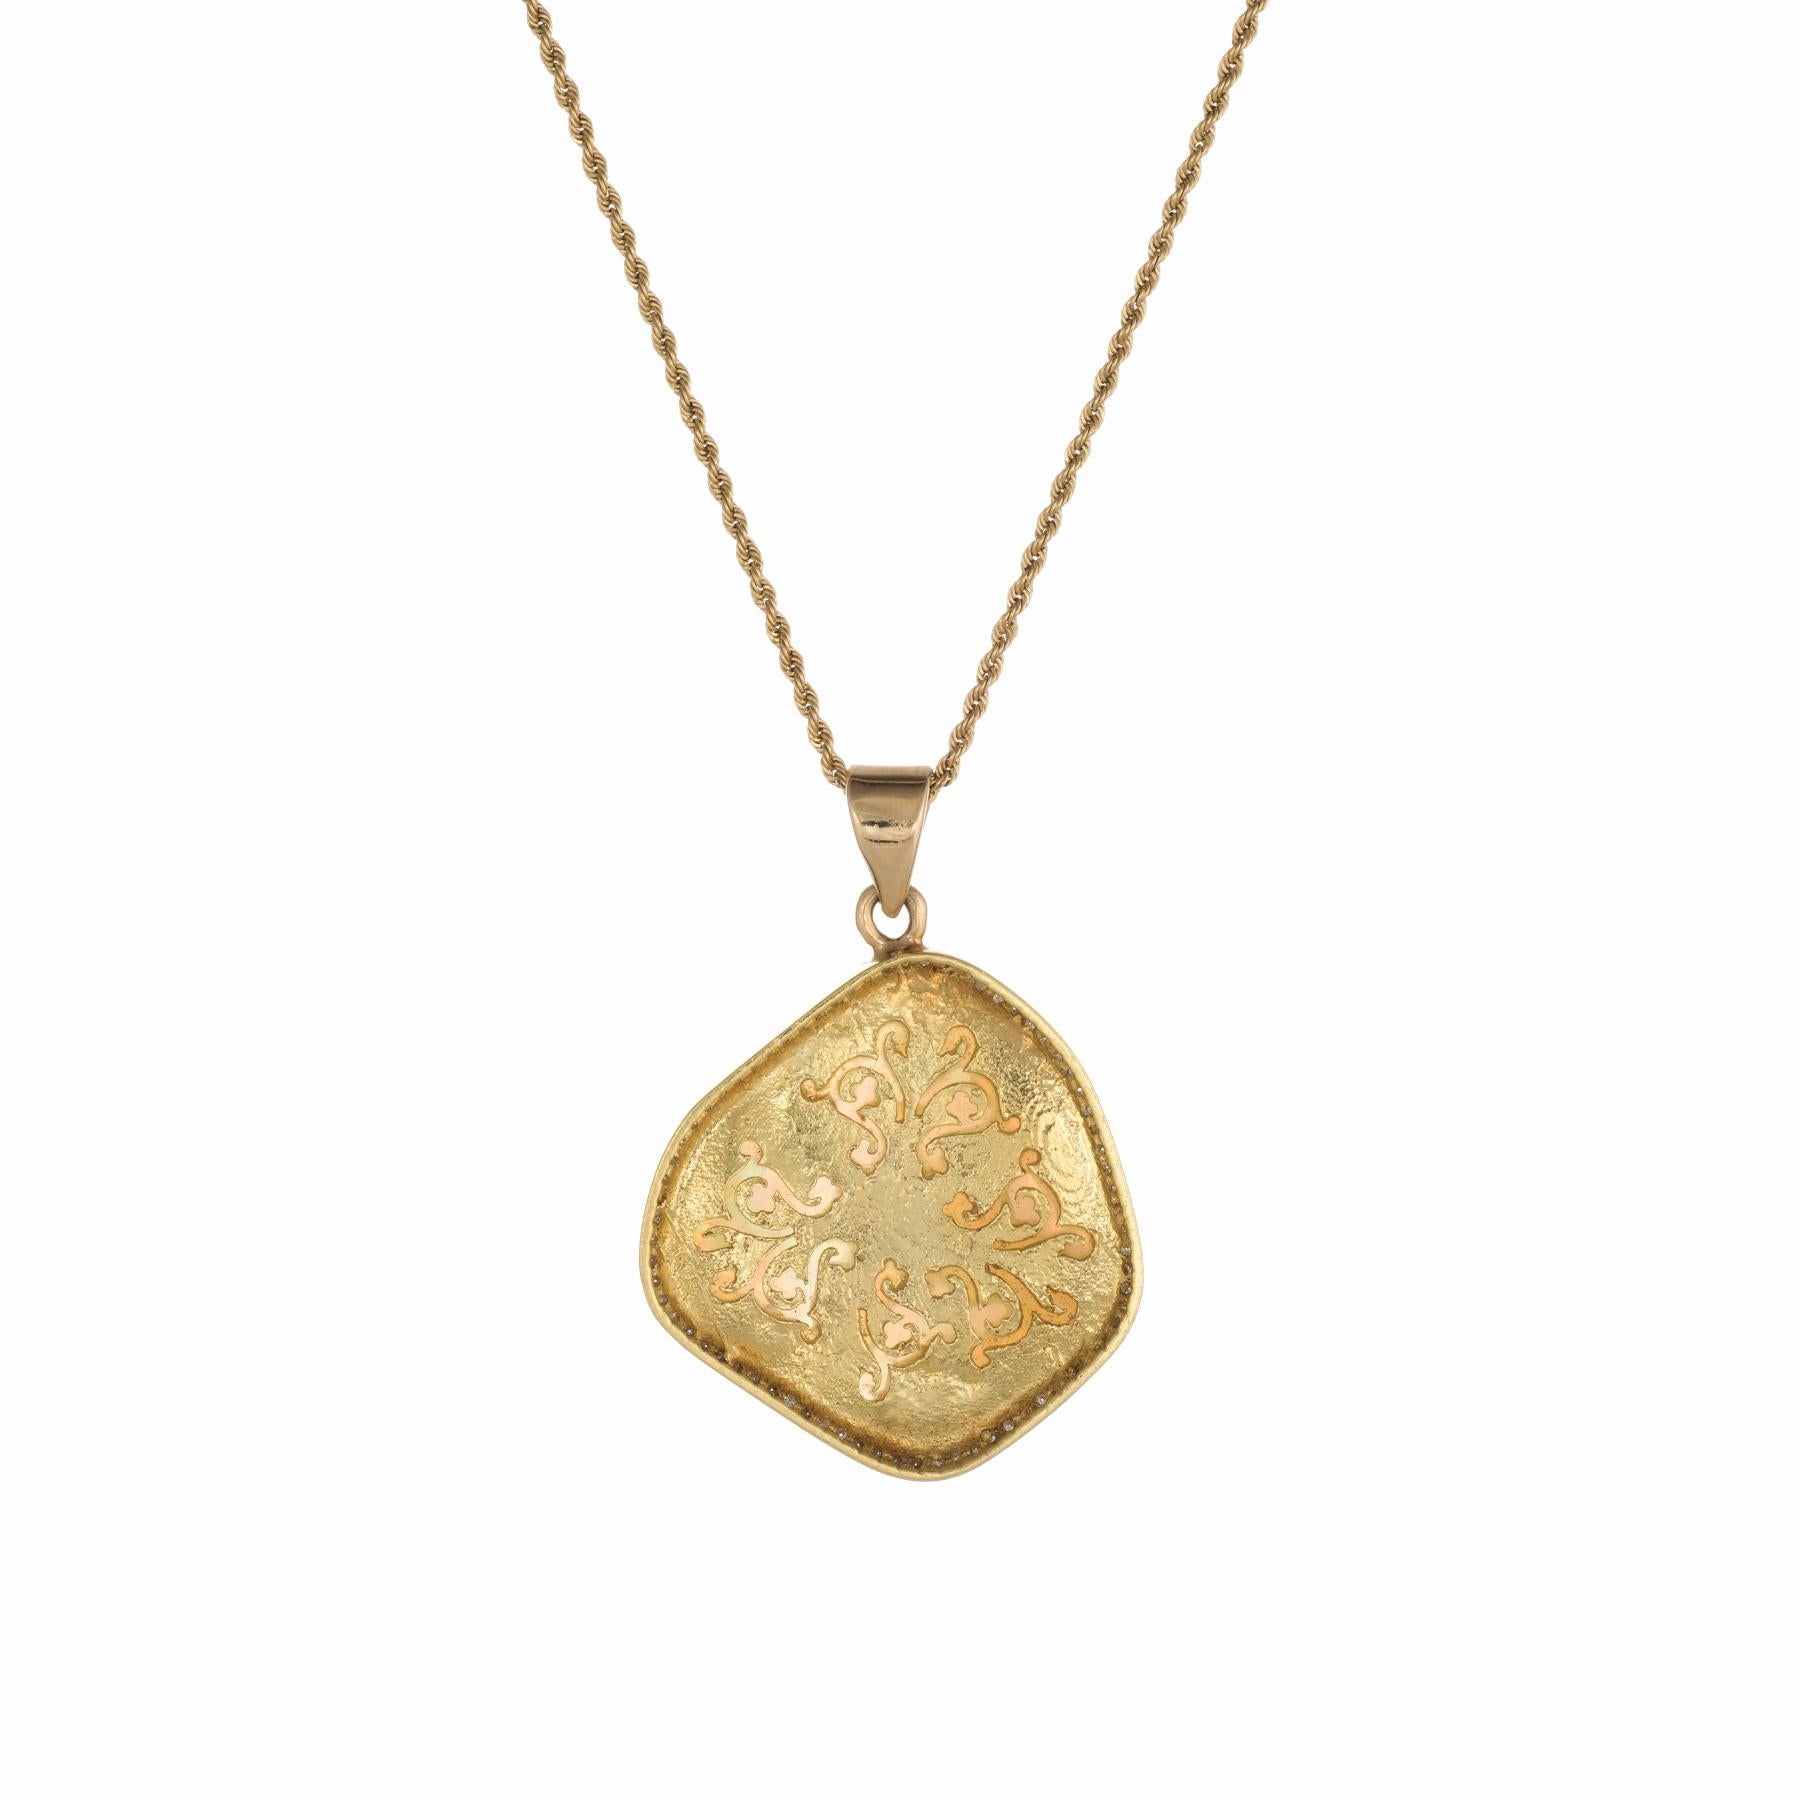 Stylish opal & diamond pendant, crafted in 18 karat yellow gold (pendant) and 14 karat yellow gold (chain).  

A large natural freeform opal measures 26mm x 24mm and is framed with 75 round brilliant cut diamonds that total an estimated 0.37 carats